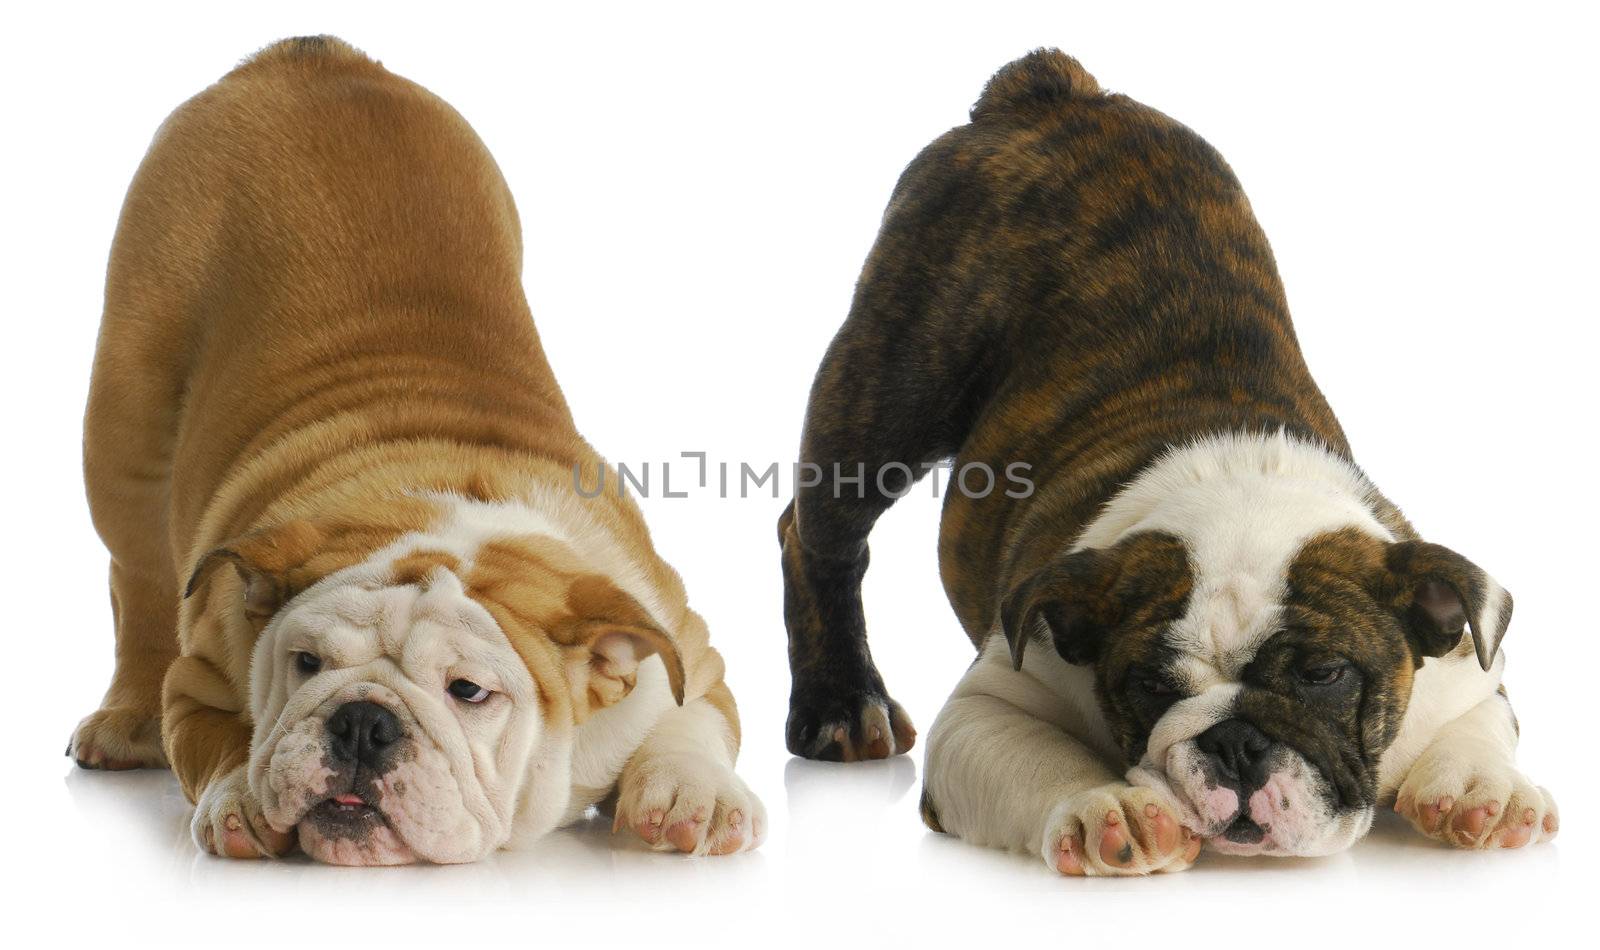 two playful puppies - english bulldogs with their bums in the air